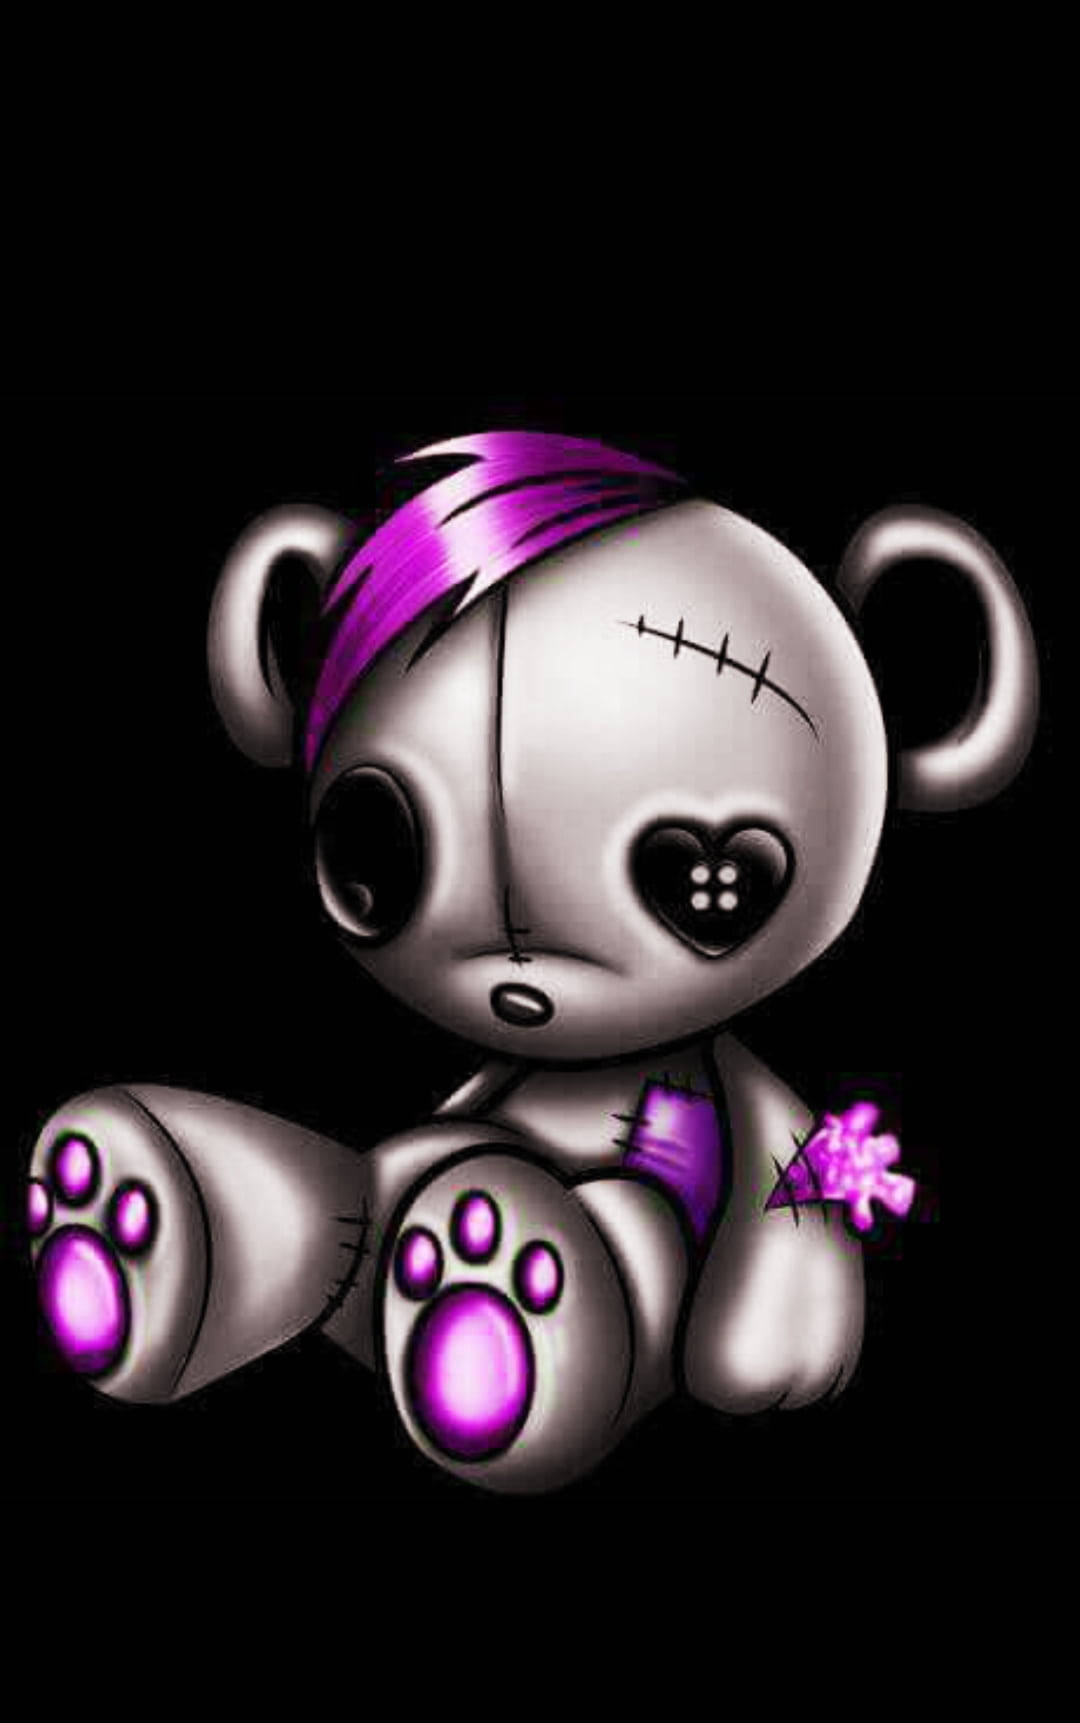 Embrace Your Darkness - Goth Teddy Bear Profile Picture Wallpaper